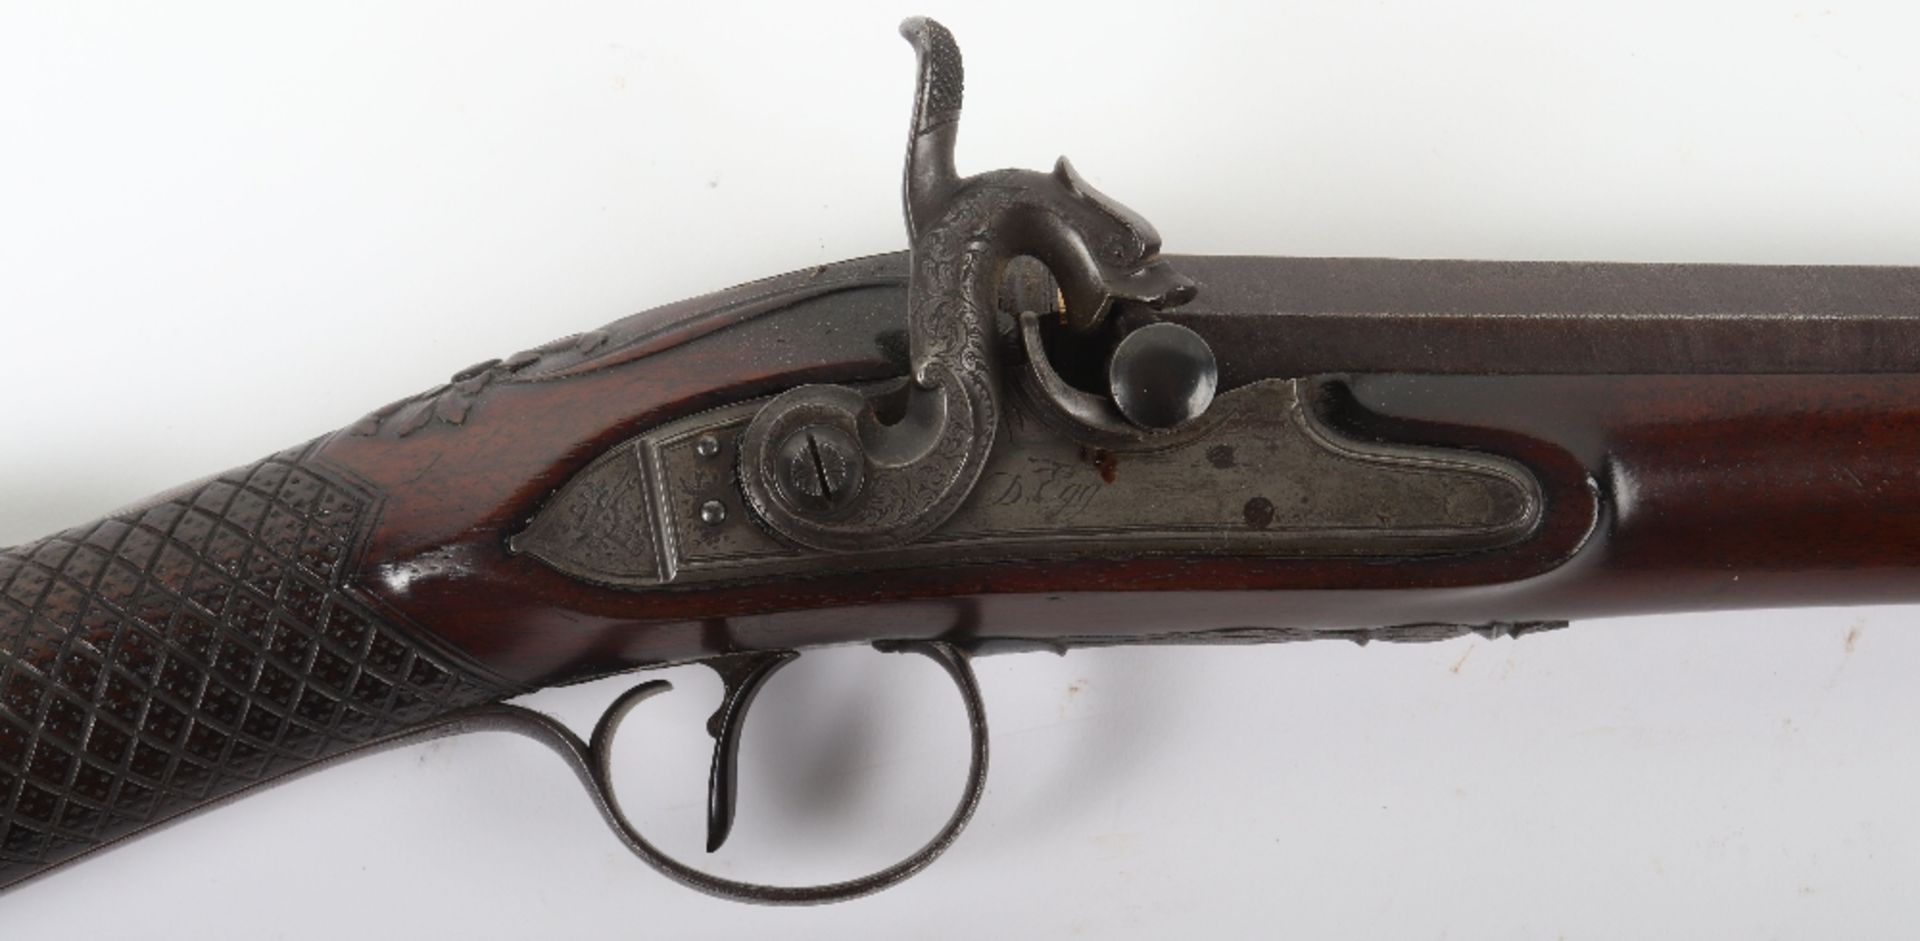 16-Bore Percussion Sporting Gun by D. Egg, Late 18th Century - Image 3 of 15